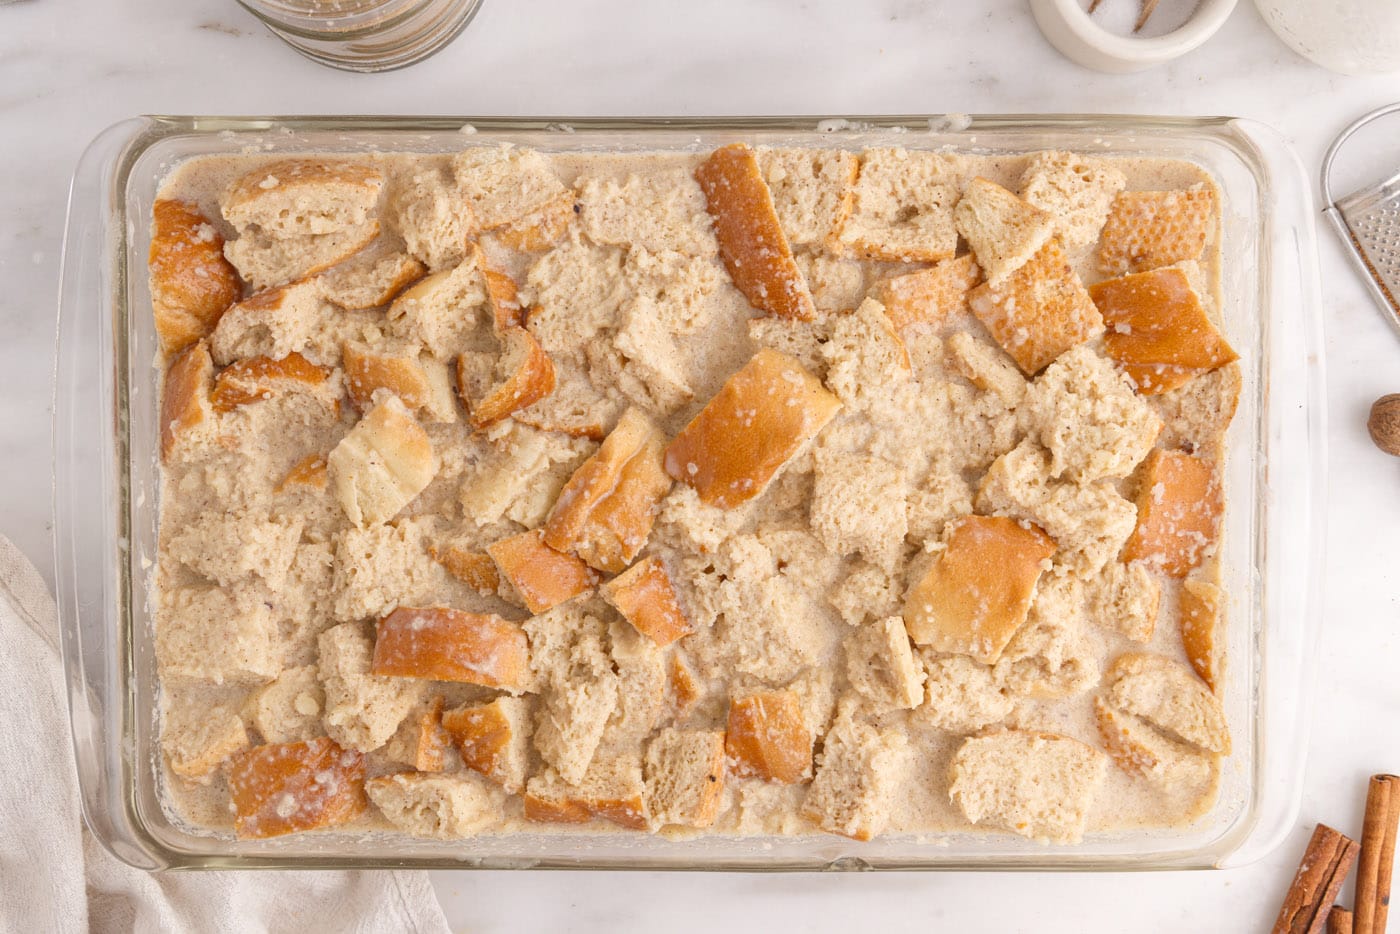 bread pudding soaking in a baking dish